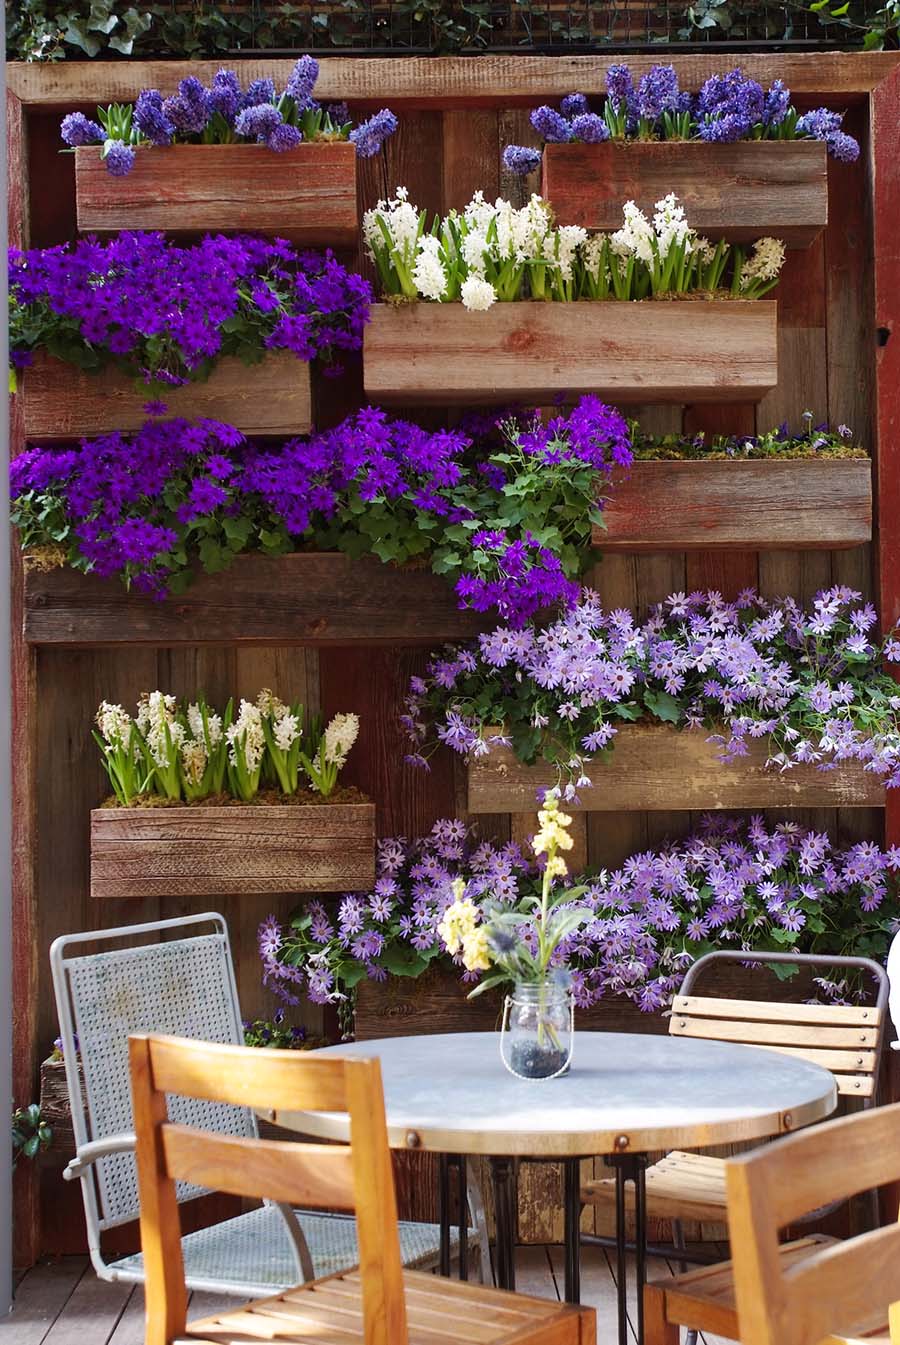 Frame a Patio Space with a Beautiful Hanging Garden